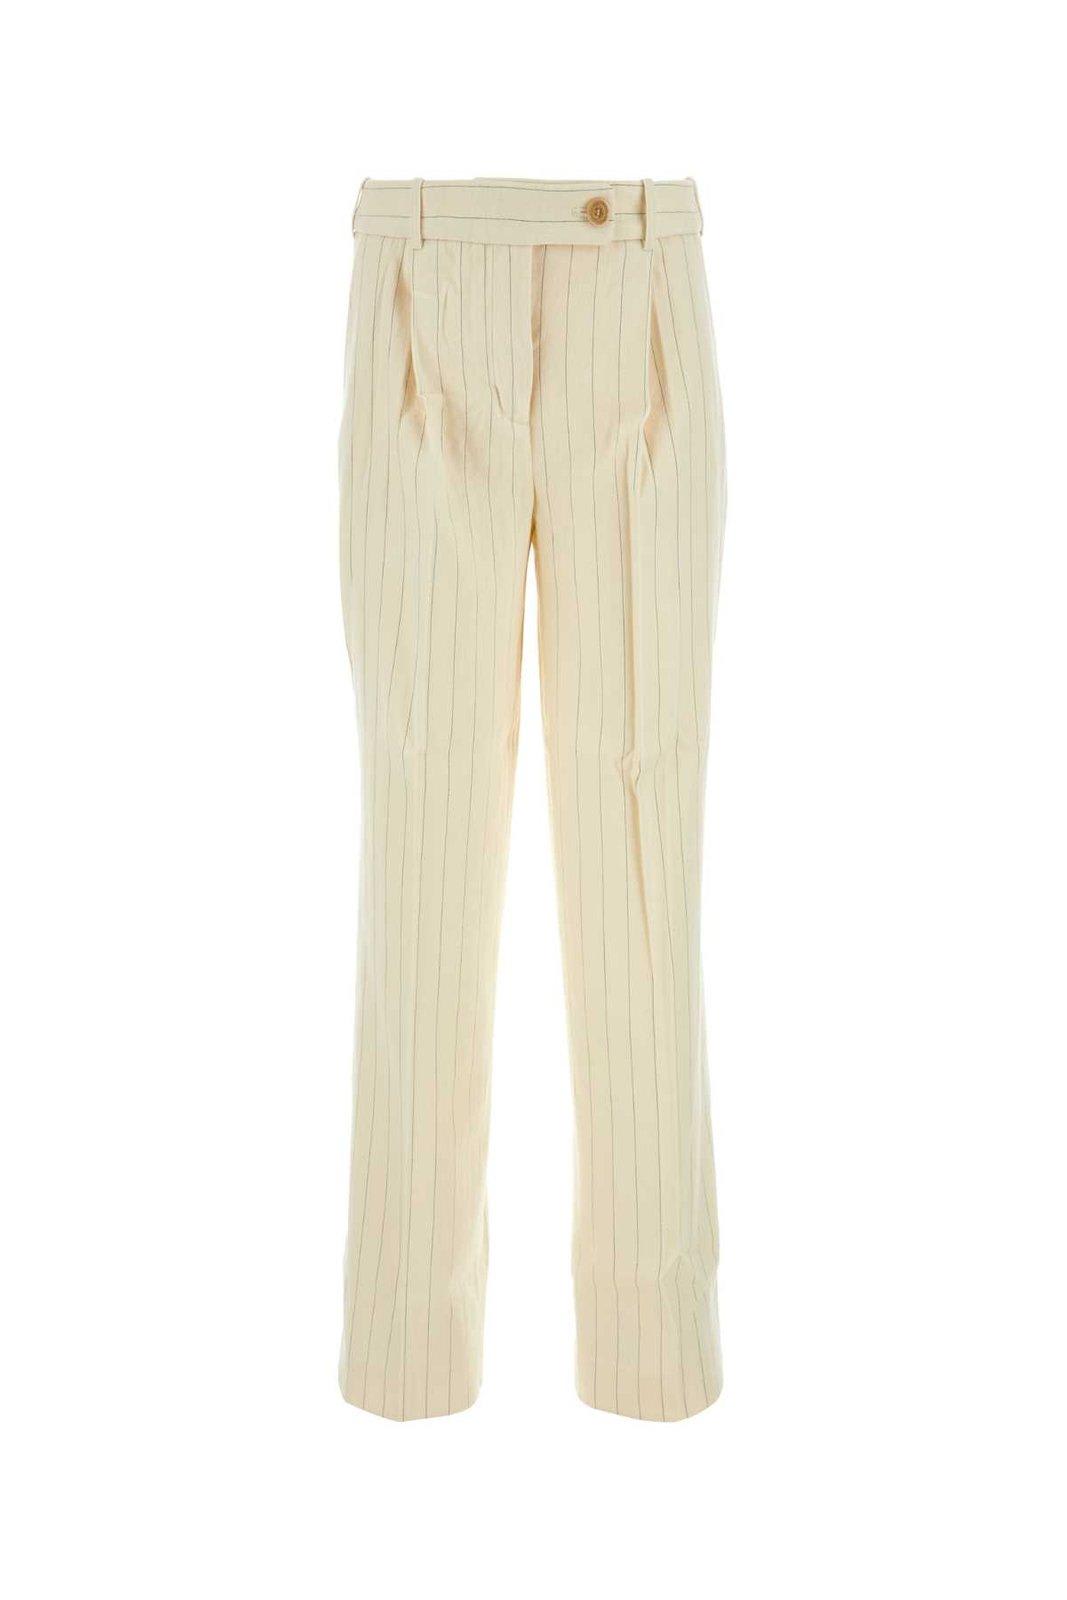 ZIMMERMANN PINSTRIPED PLEATED TROUSERS